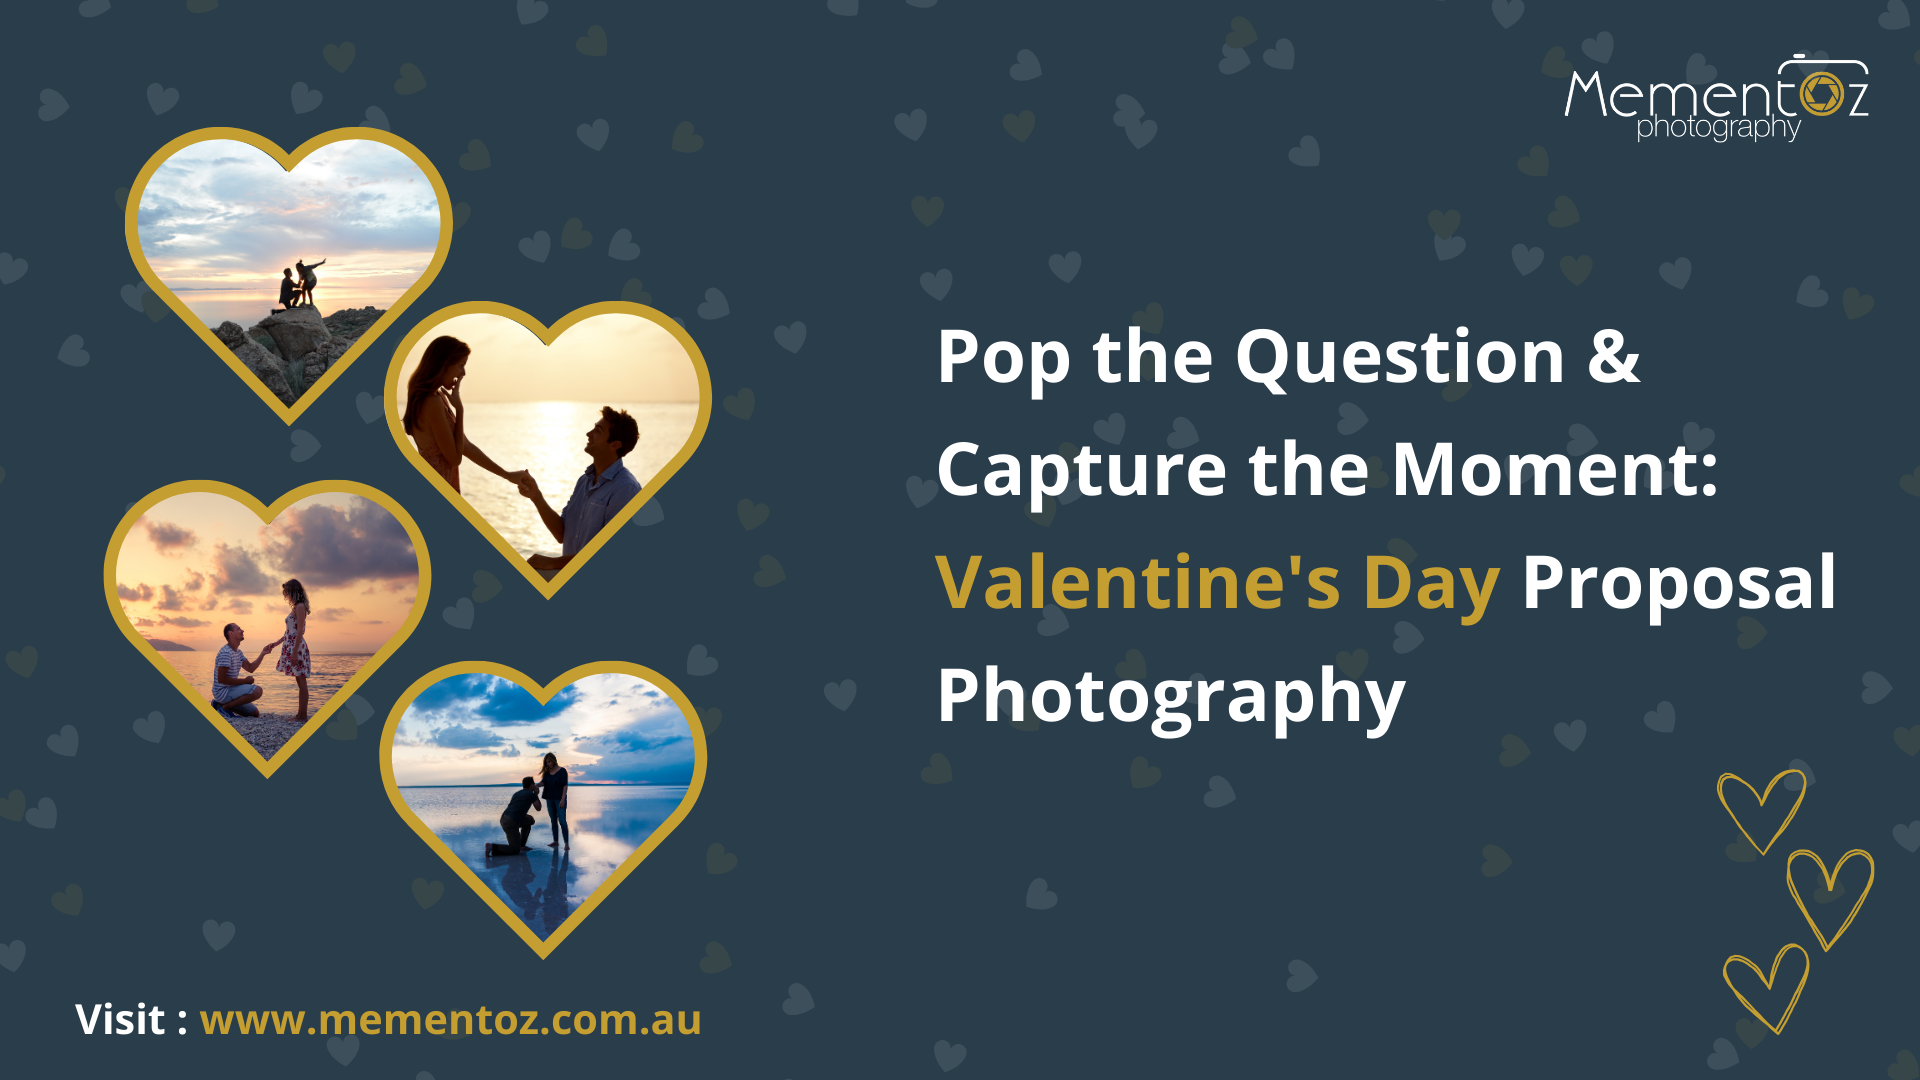 Pop the Question & Capture the Moment: Valentine's Day Proposal Photography